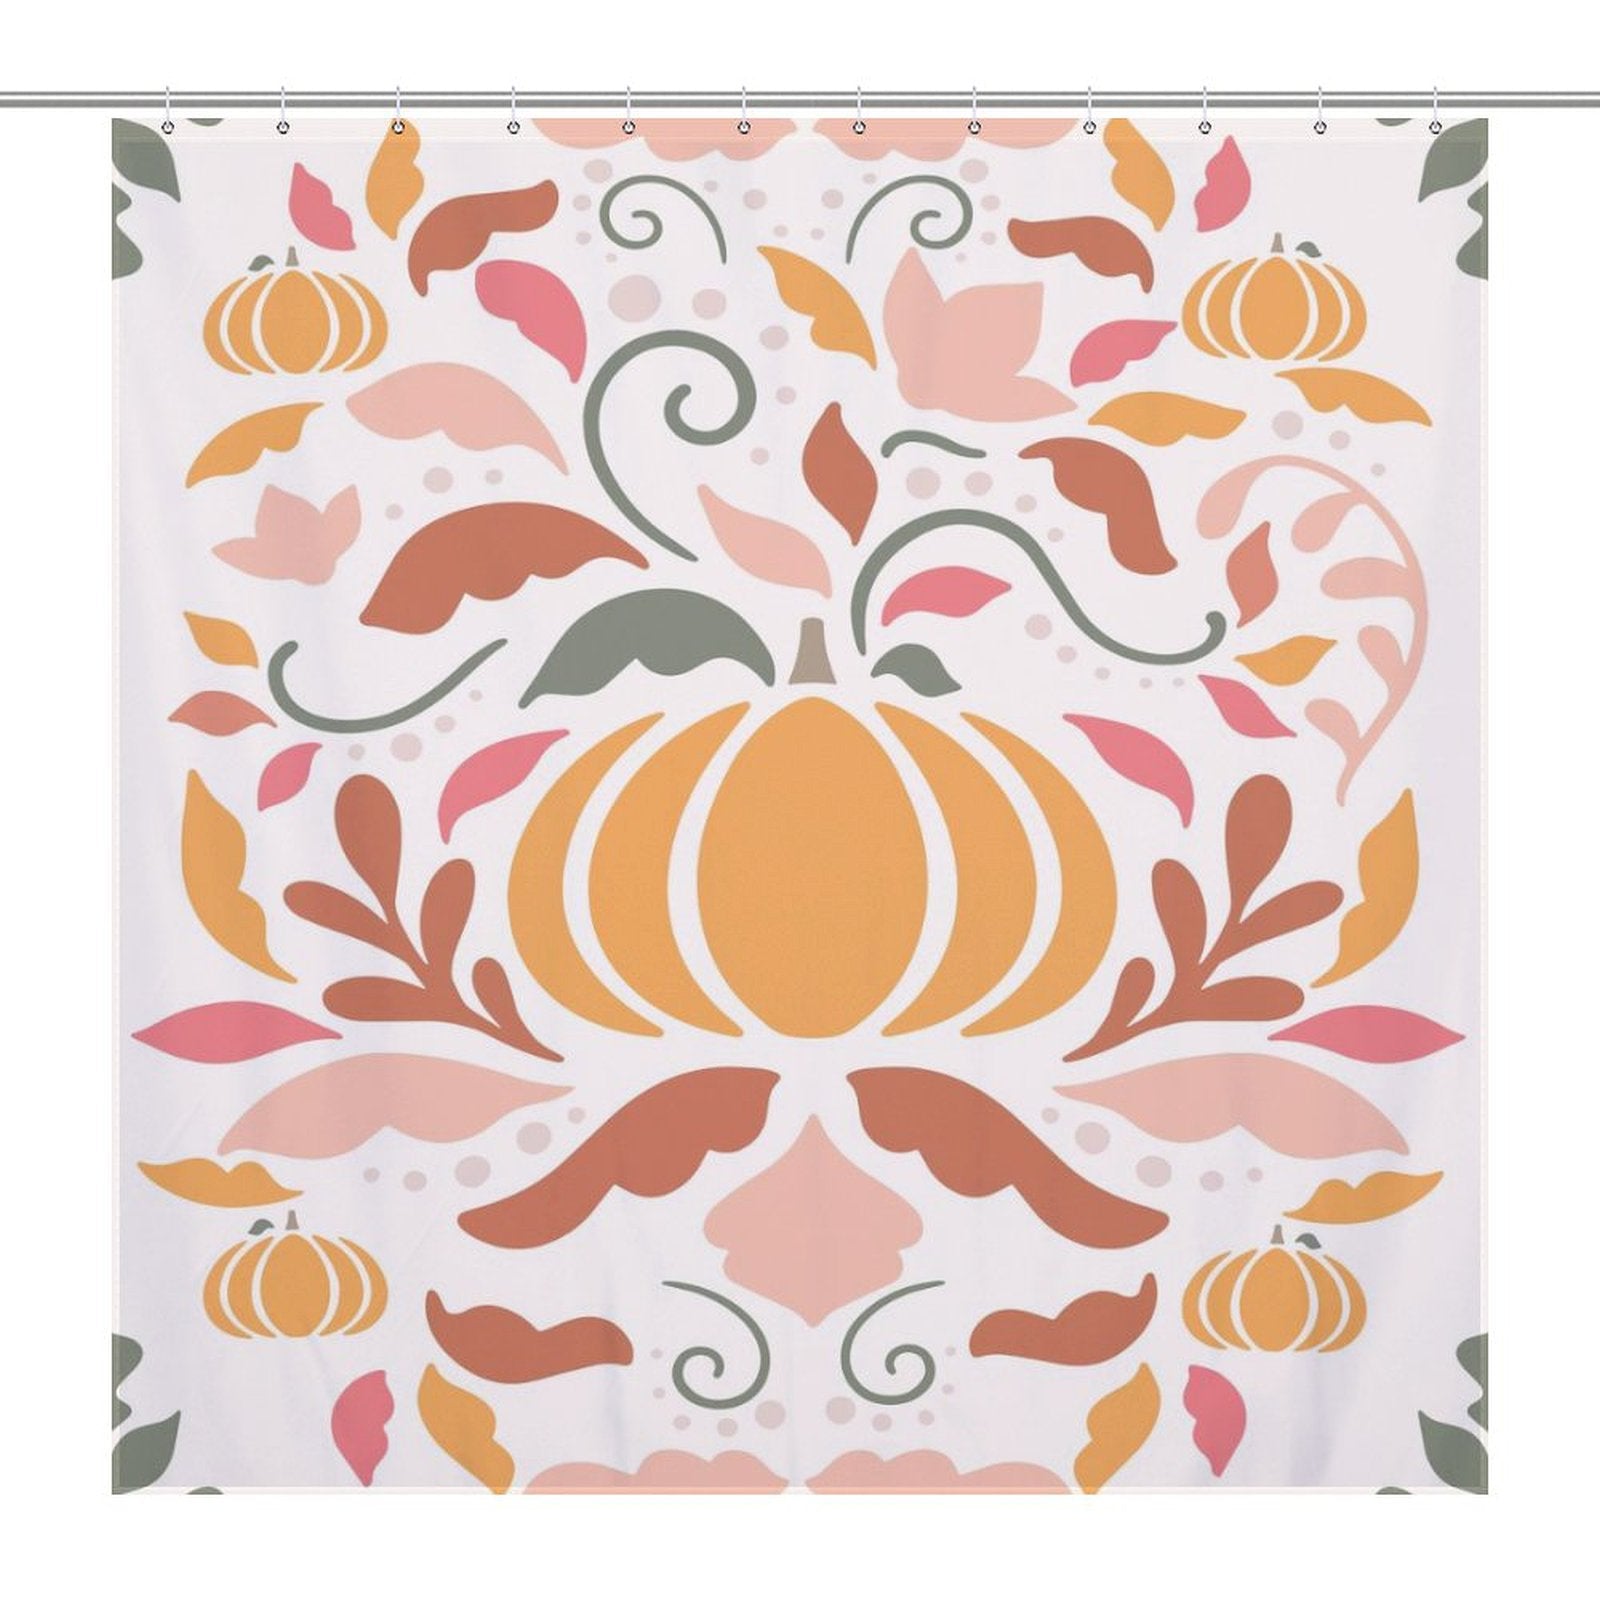 The Boho Fall Pumpkins Pink Floral Shower Curtain-Cottoncat by Cotton Cat showcases an orange pumpkin design with pink, orange, and green foliage patterns on a white background, perfect as a Bohemian Floral Bathroom Decor piece.